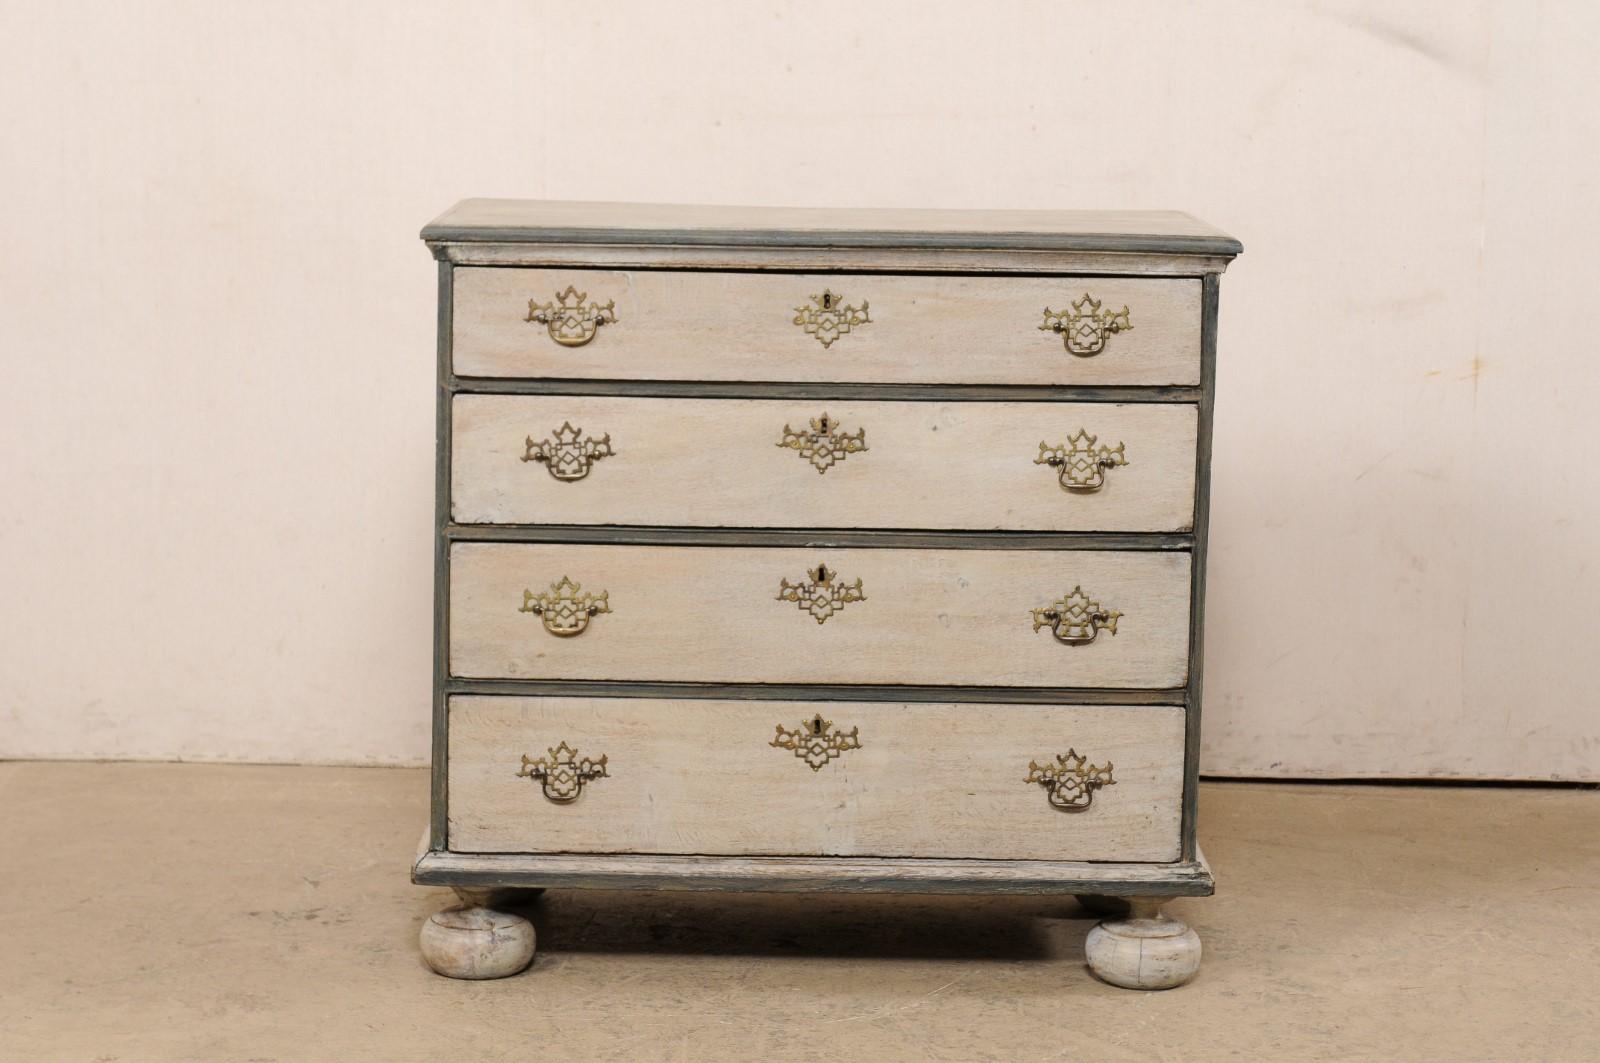 An English wood chest, painted in gray hues, from the turn of the 18th and 19th century. This antique chest from England has been primarily designed in straight/clean lines and features a rectangular-shaped top over the case which houses four